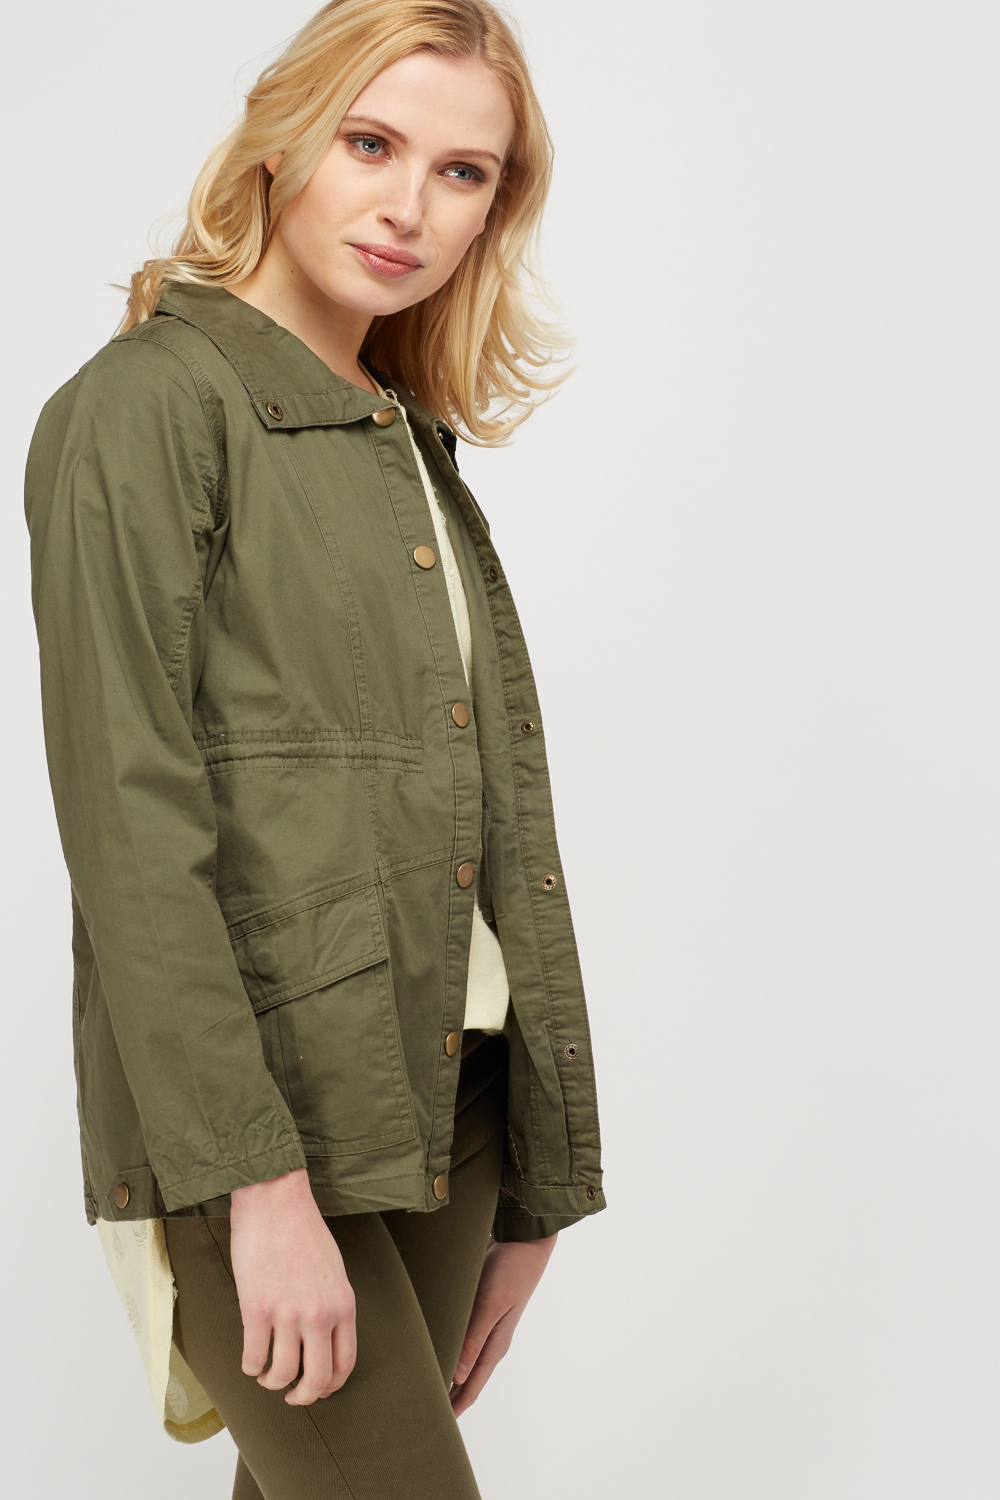 Light Weight Casual Jacket - Just $7